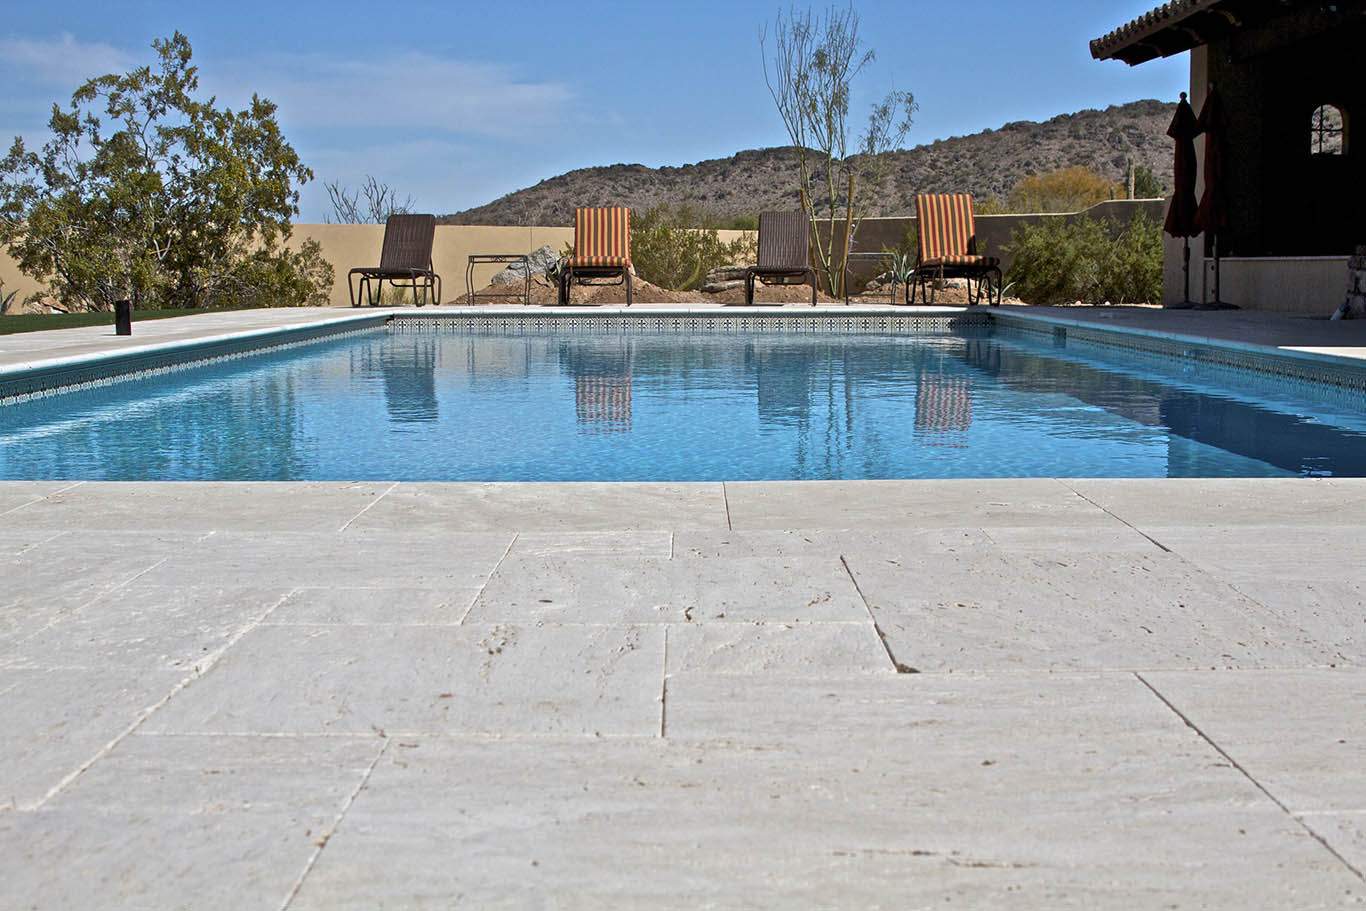 tuscan-rustic-unfilled-tumbled-travertine-pool-tiles-pavers-french-pattern